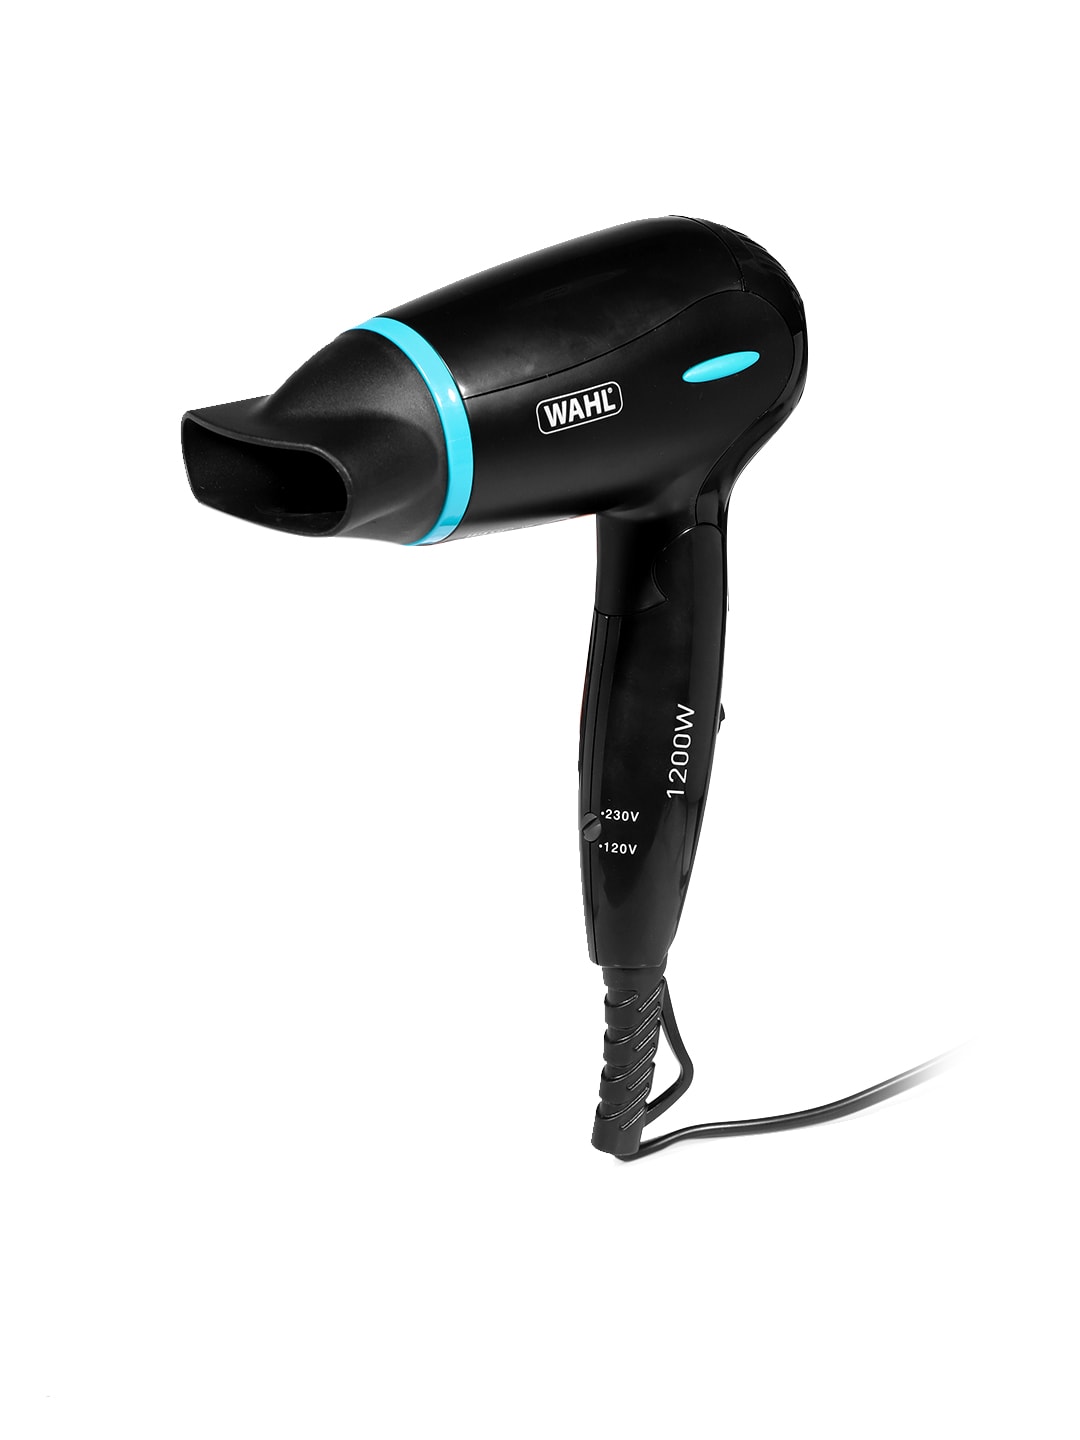 WAHL Unisex Black Travel Hair Dryer WCHD4 Price in India, Full  Specifications & Offers 